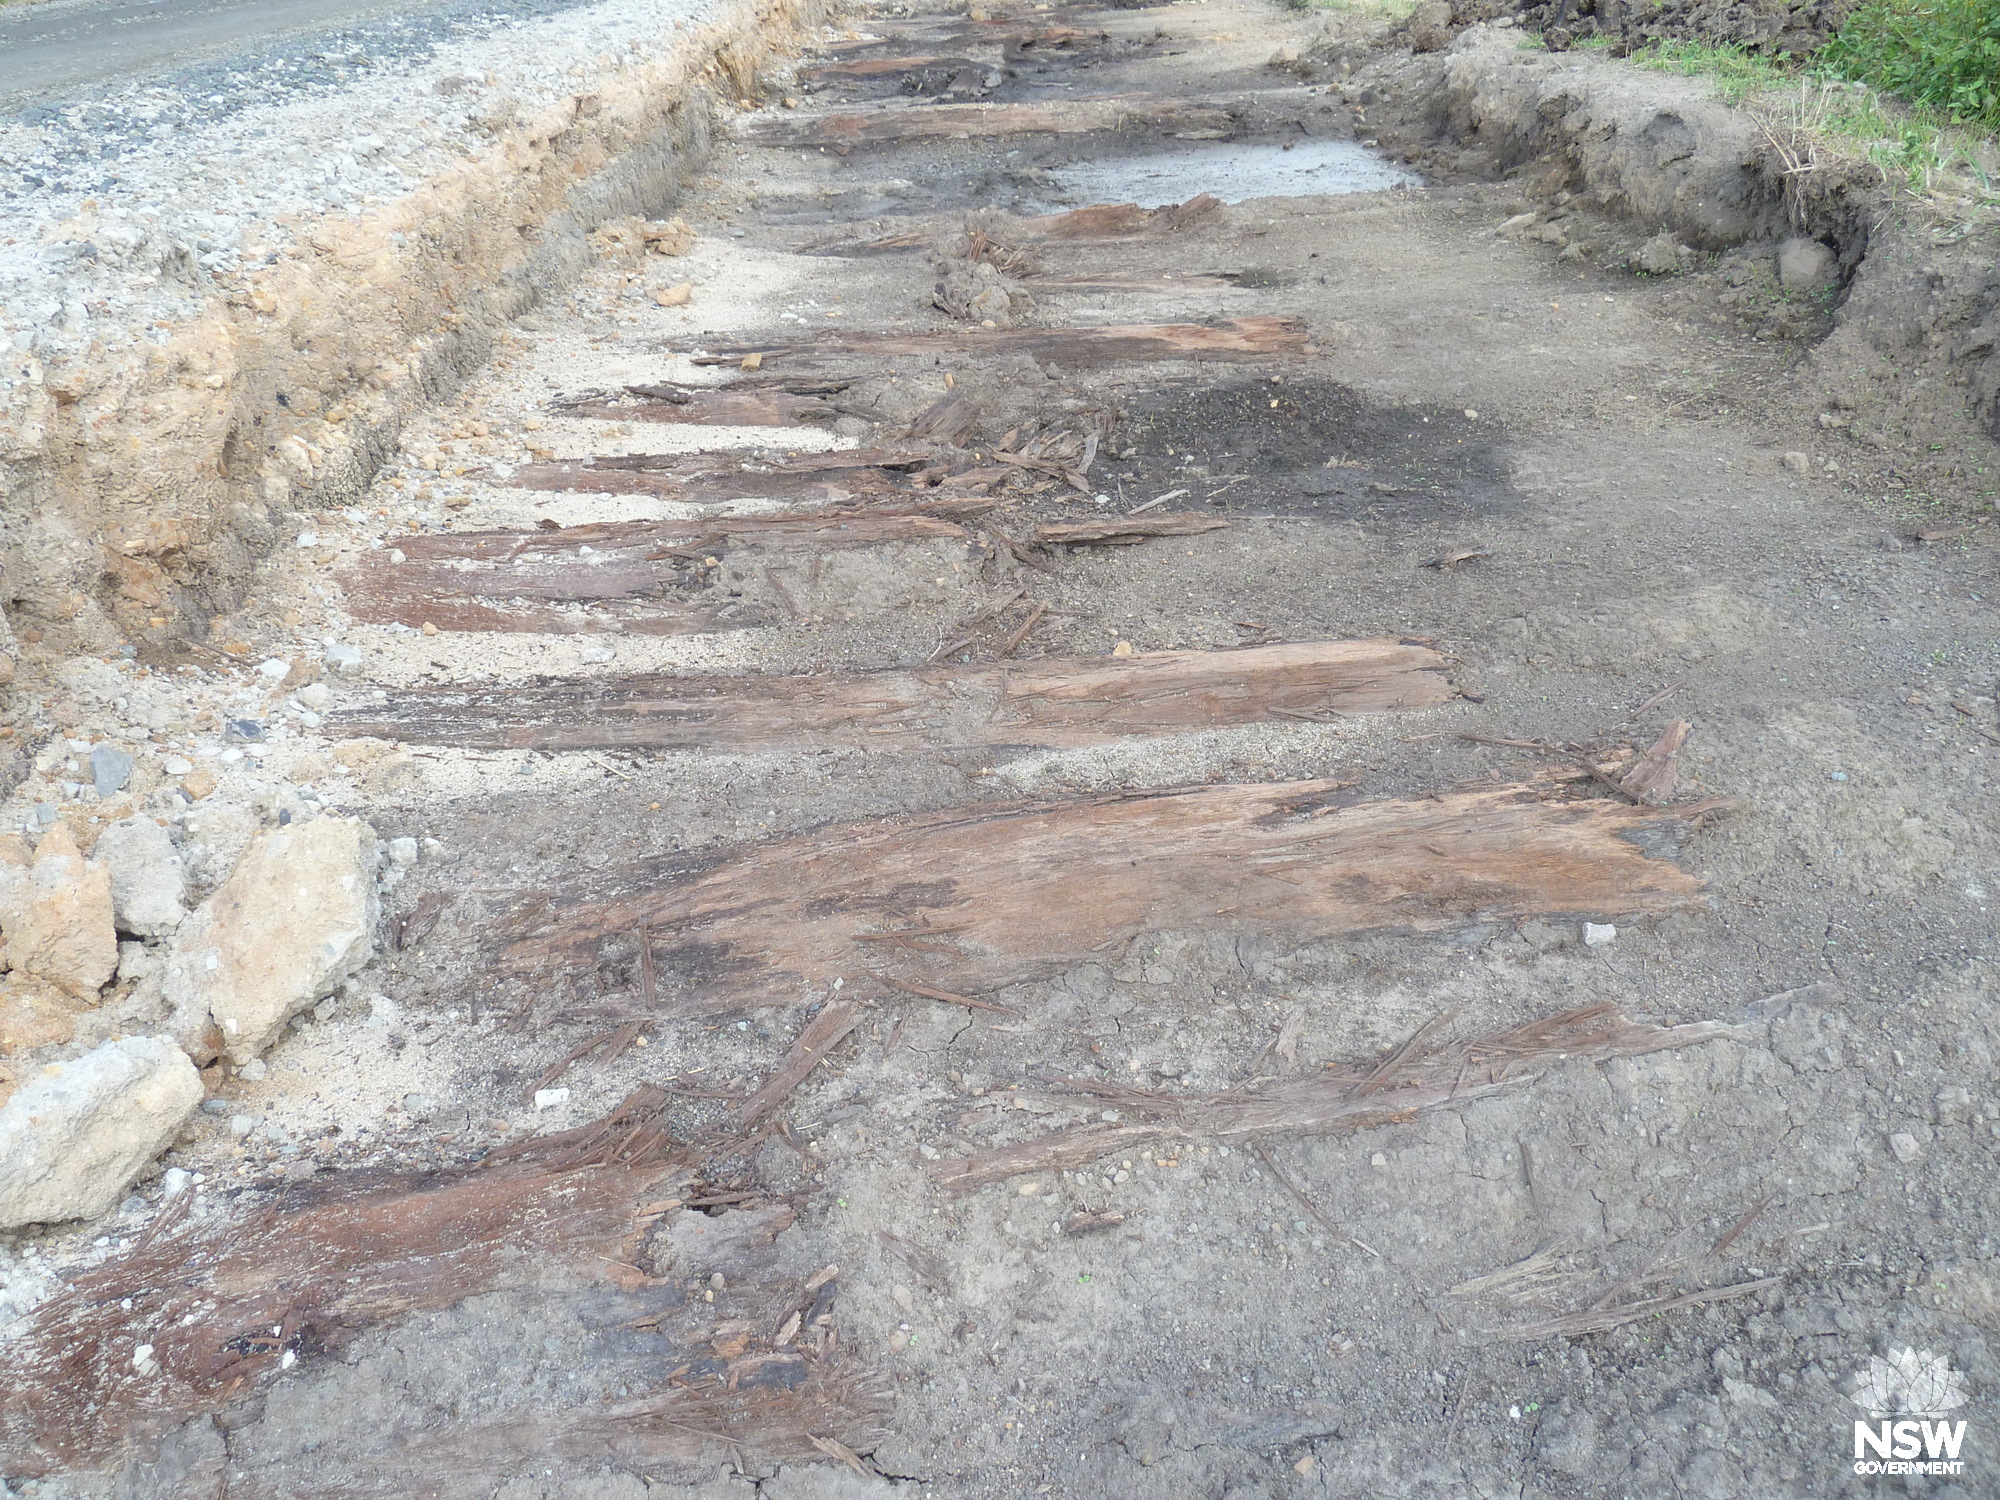 Evidence of an early corduroy road under existing road on approach to Sugar mill to the north of Conservation Area